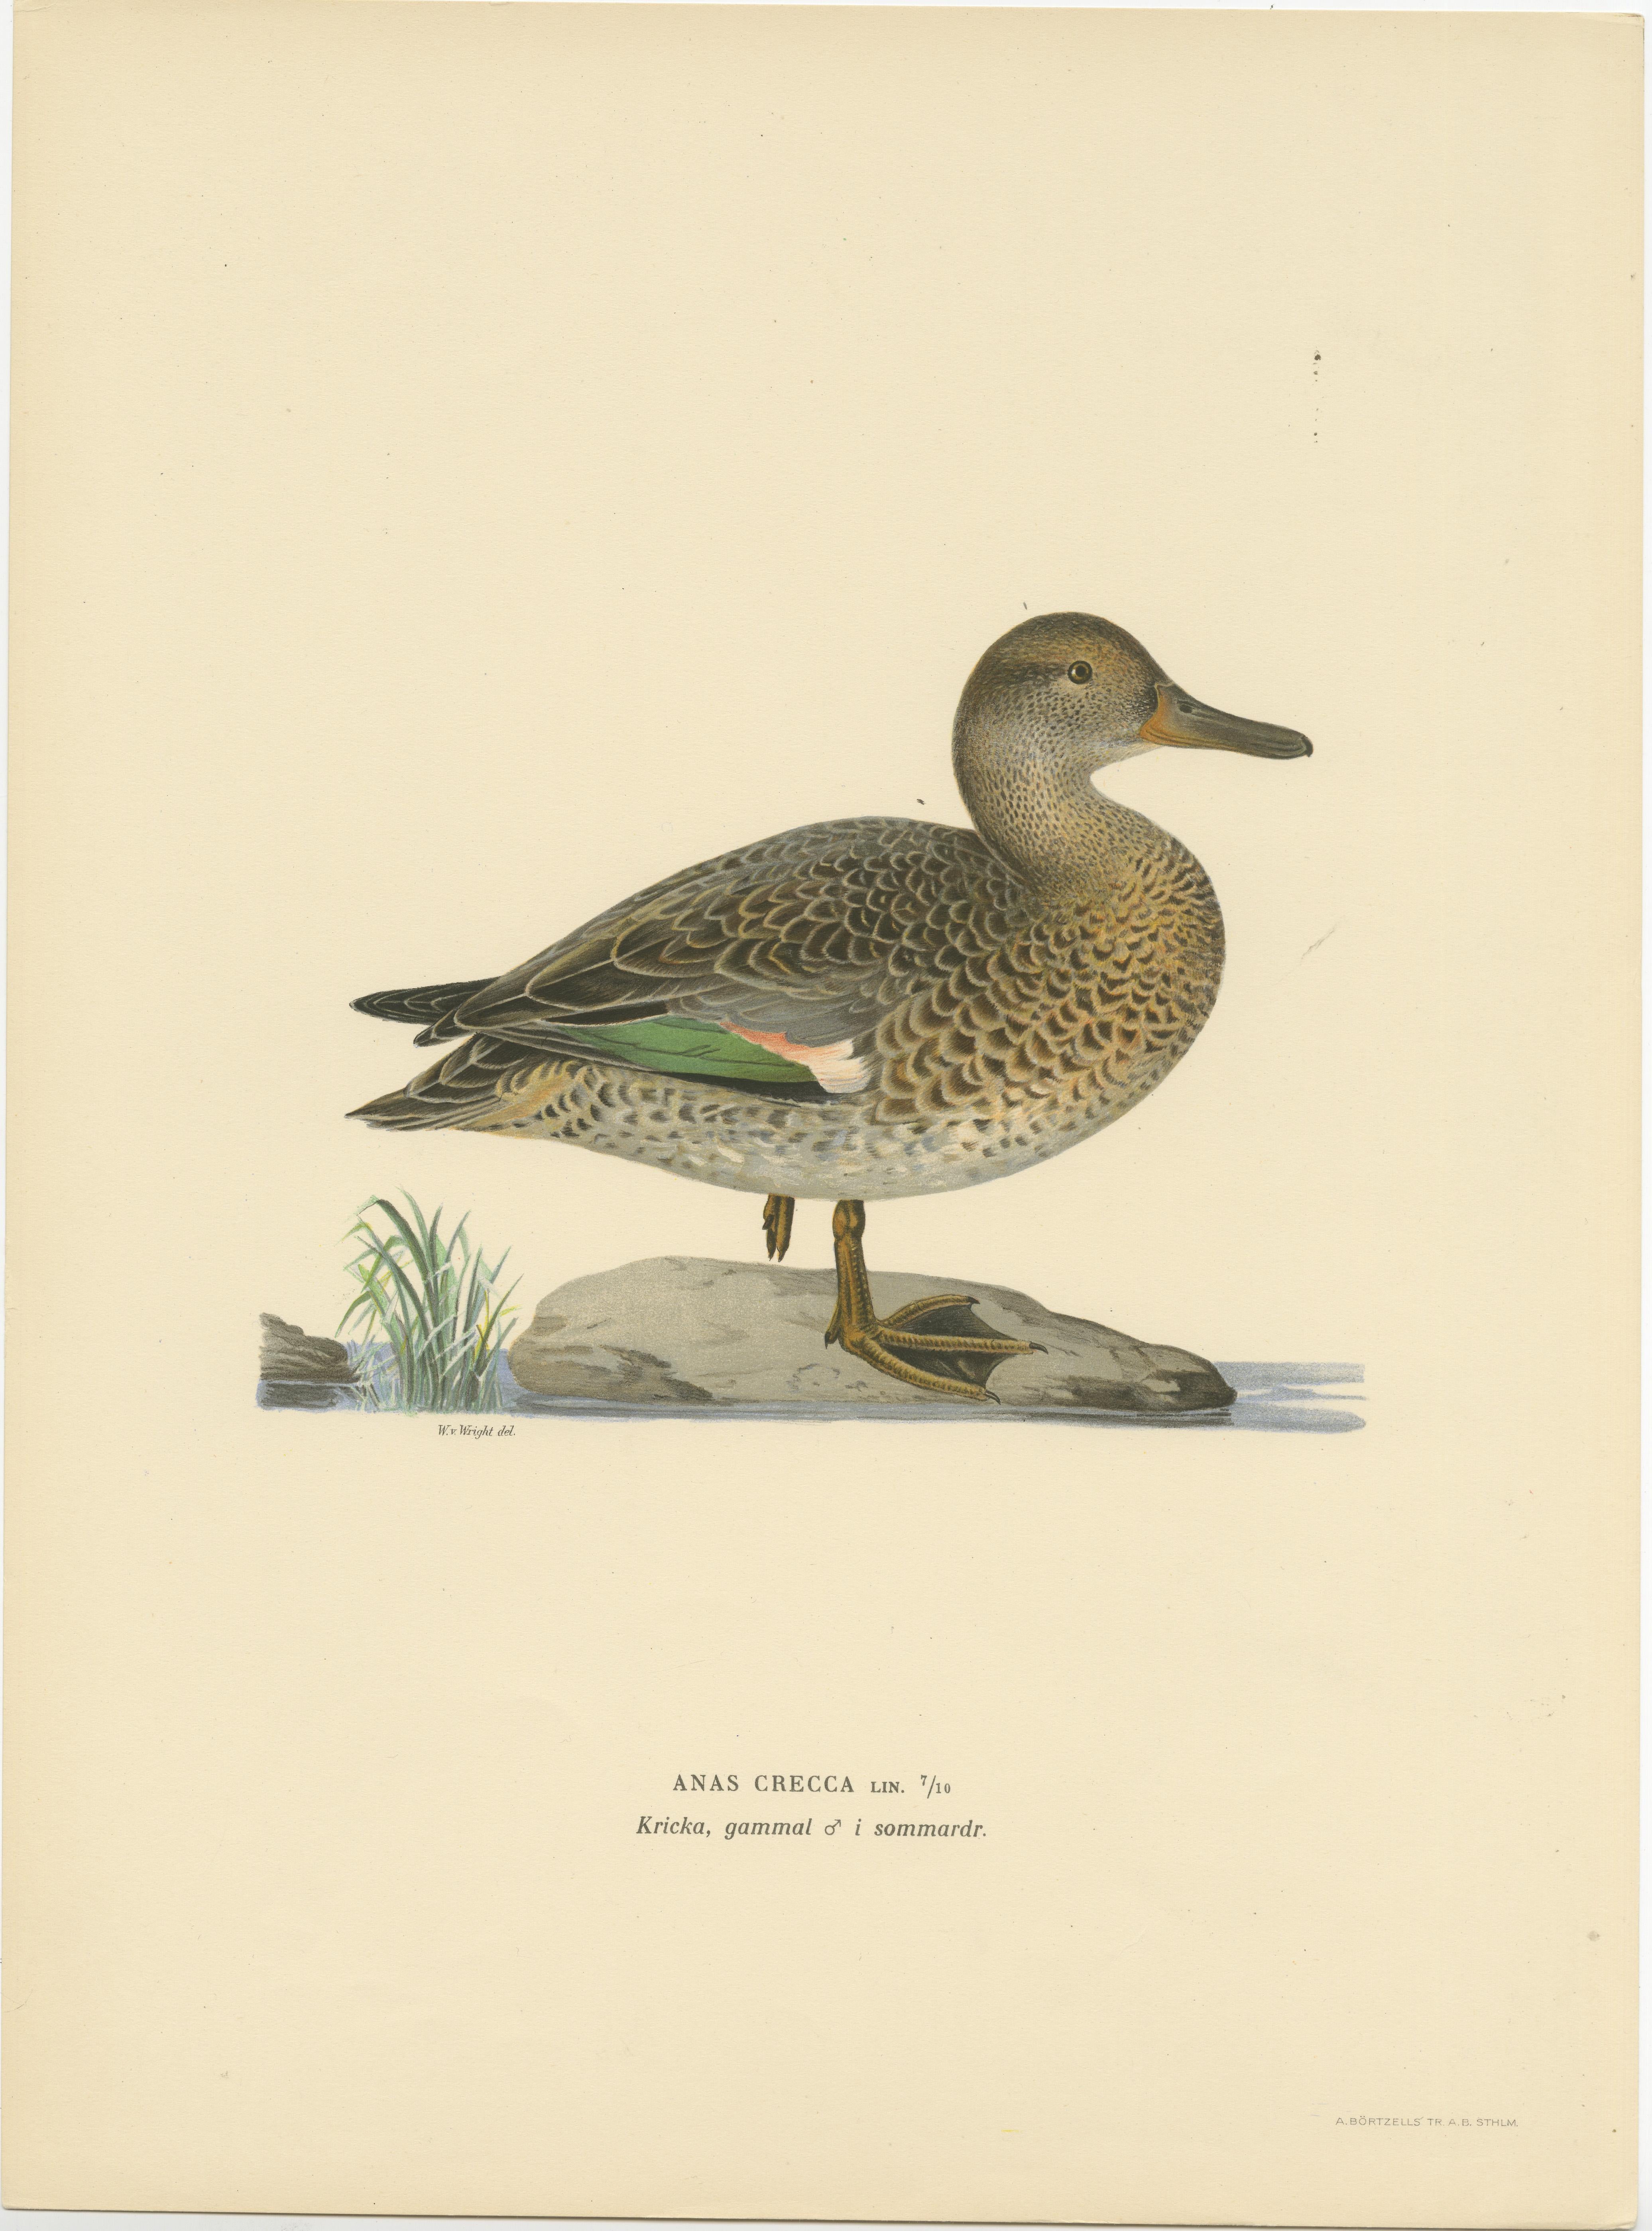 This original image is a vintage bird print titled 'Anas Crecca', which depicts the European teal. This is a small dabbling duck, known for its striking green wing patch and whistling calls. The artwork comes from 